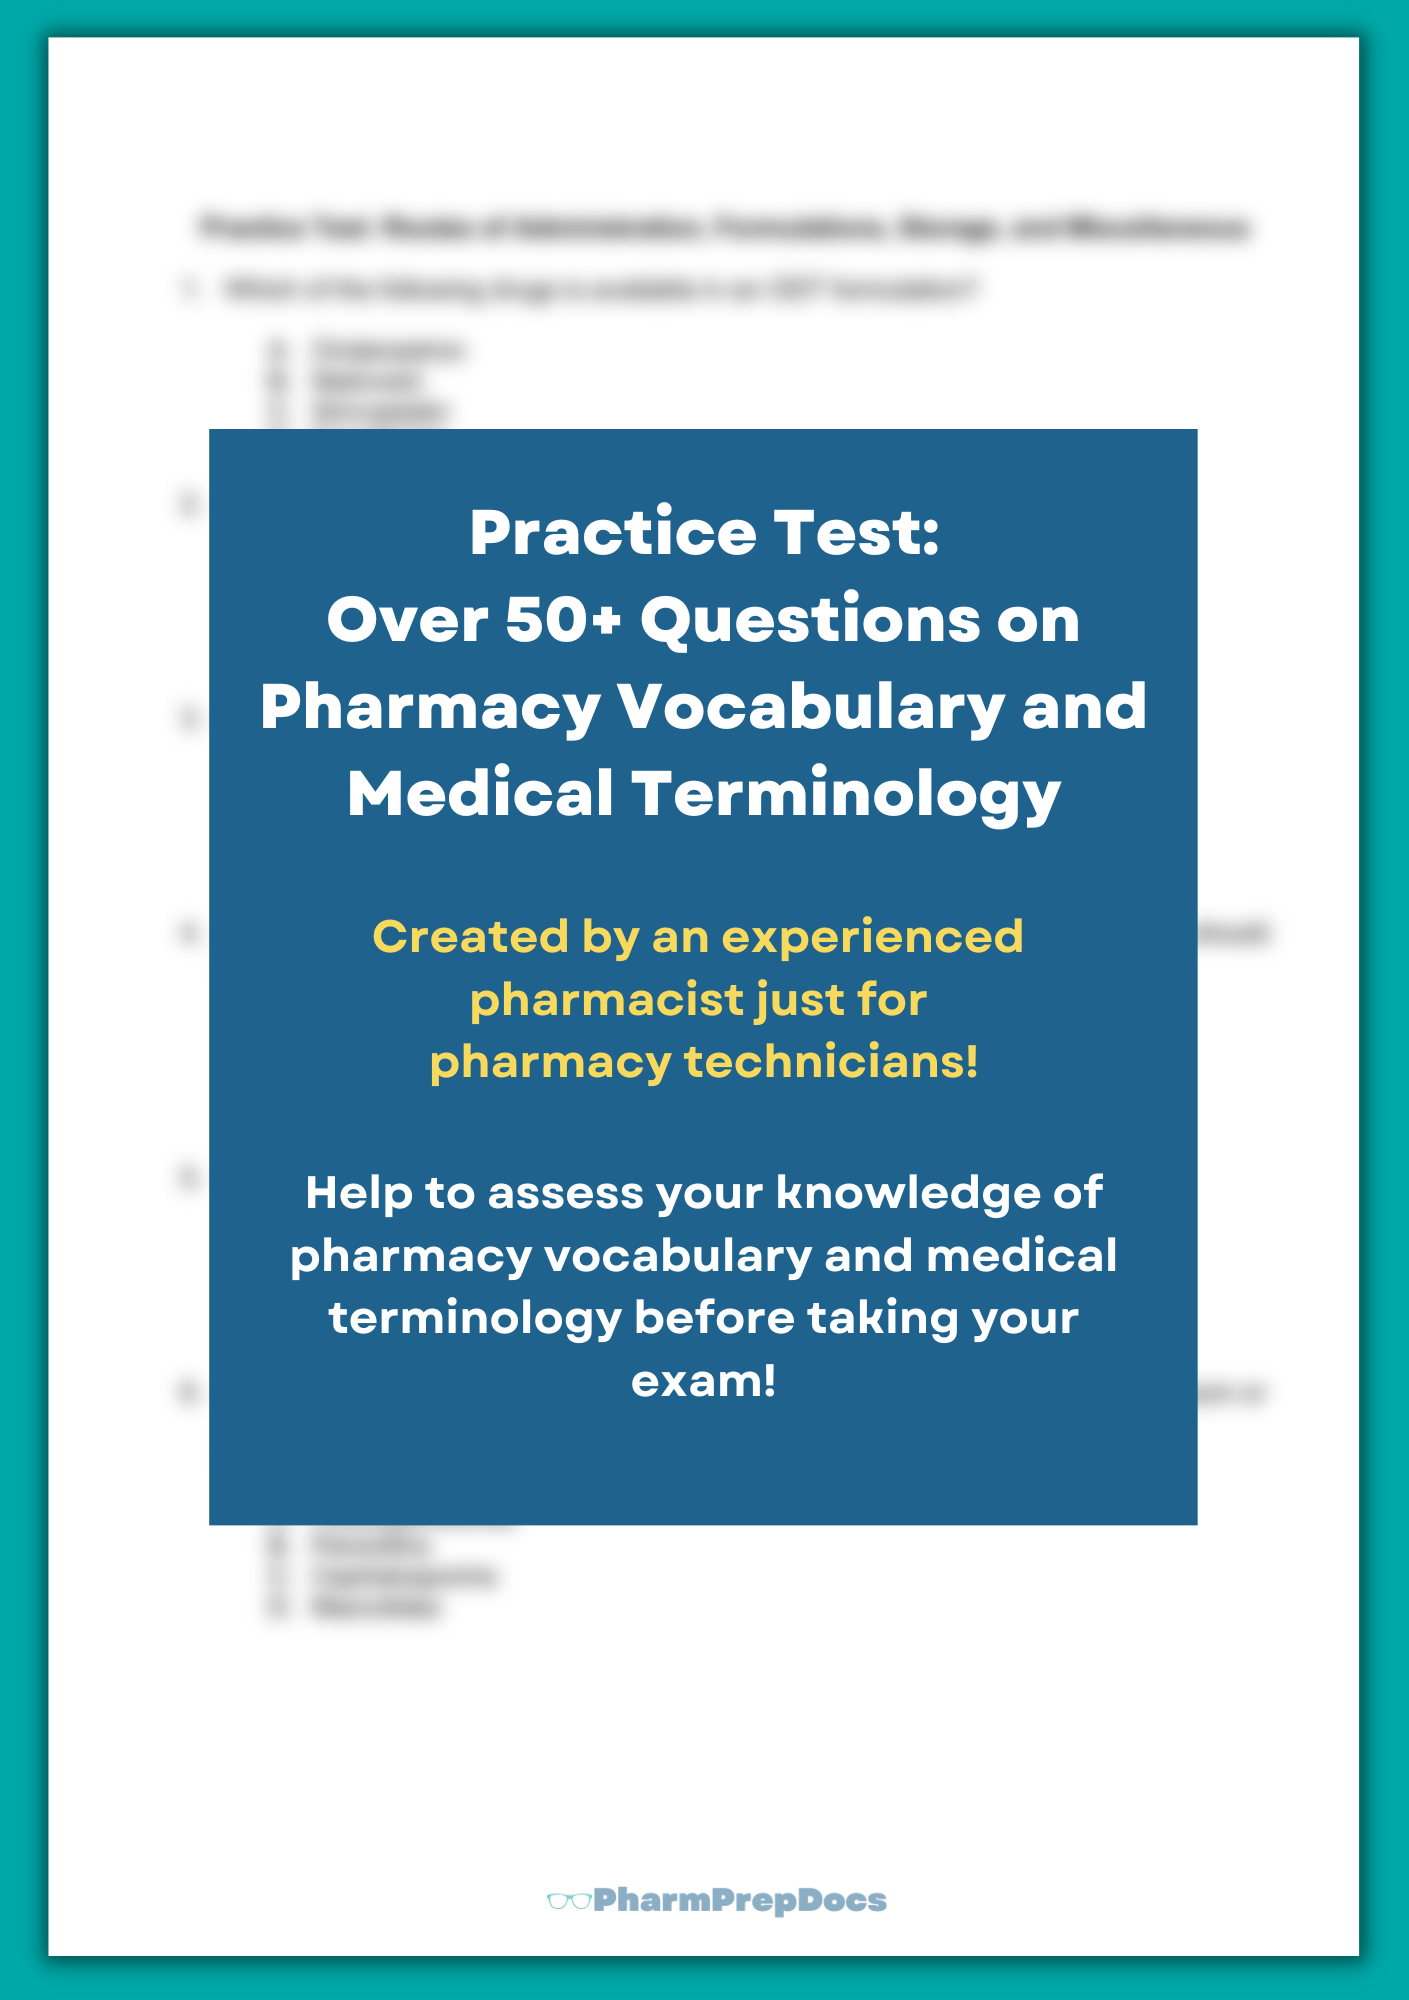 Practice Test: Pharmacy Vocabulary and Medical Terminology